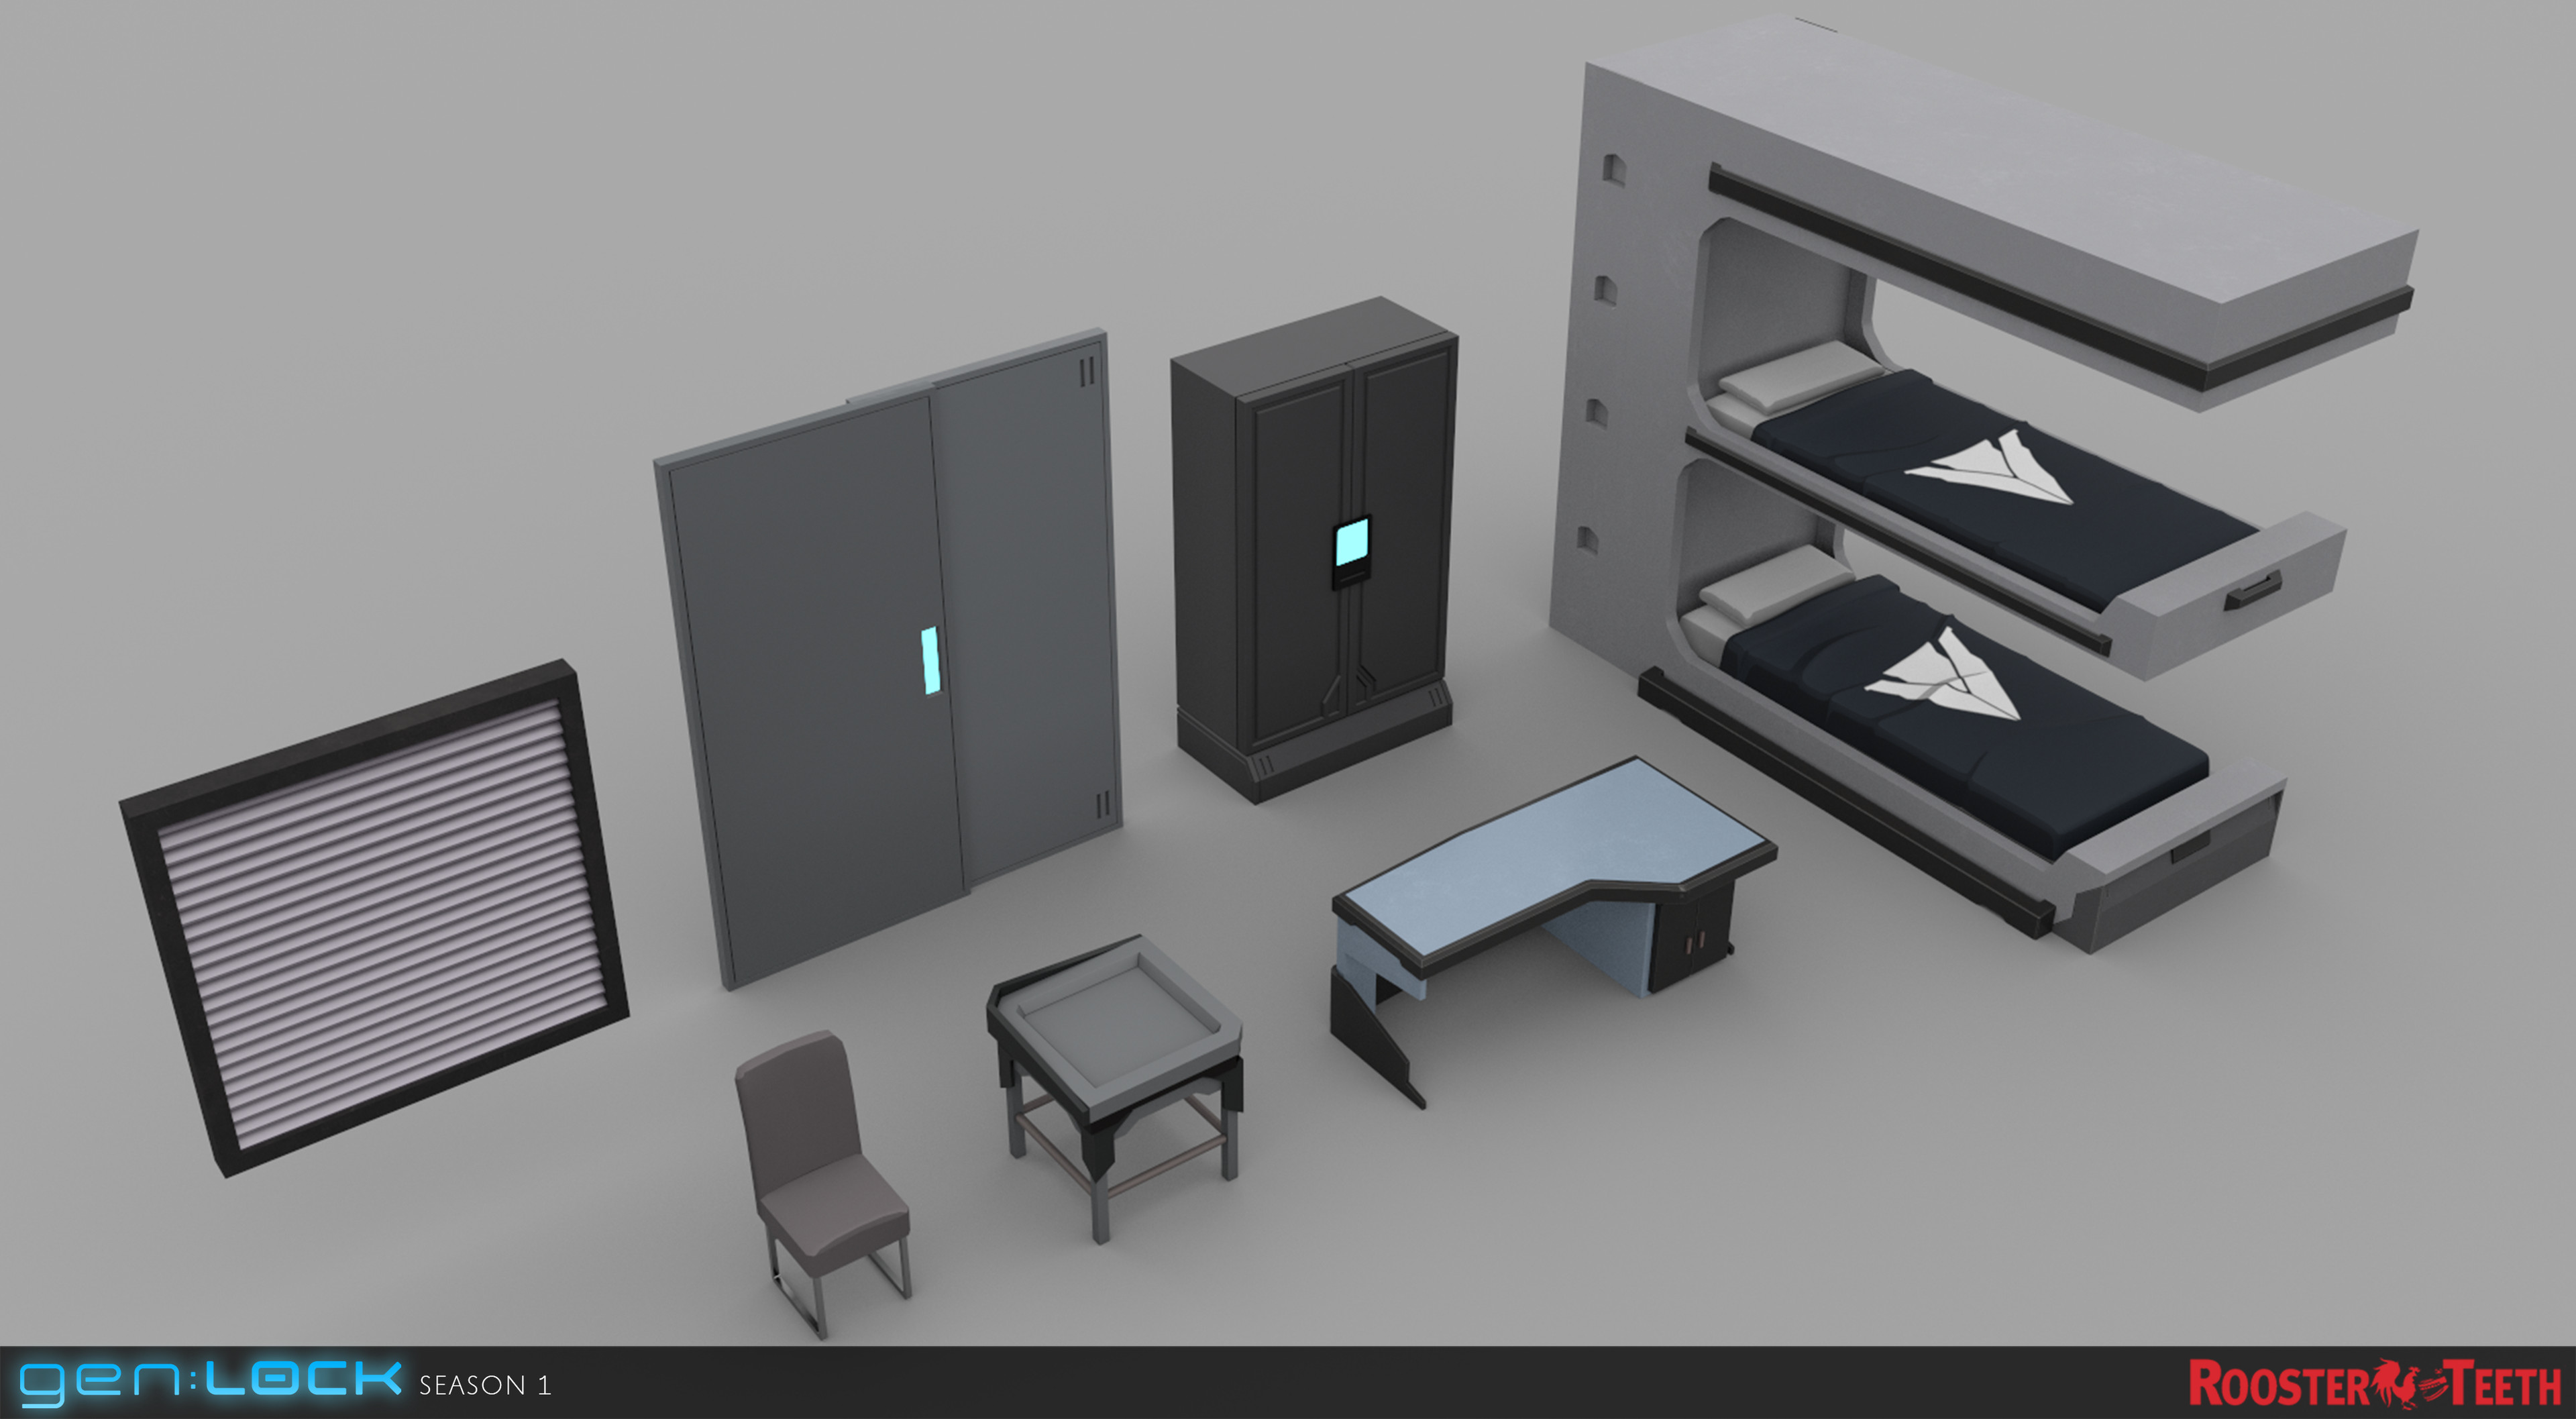 Some of the props from the barracks I modeled and textured.